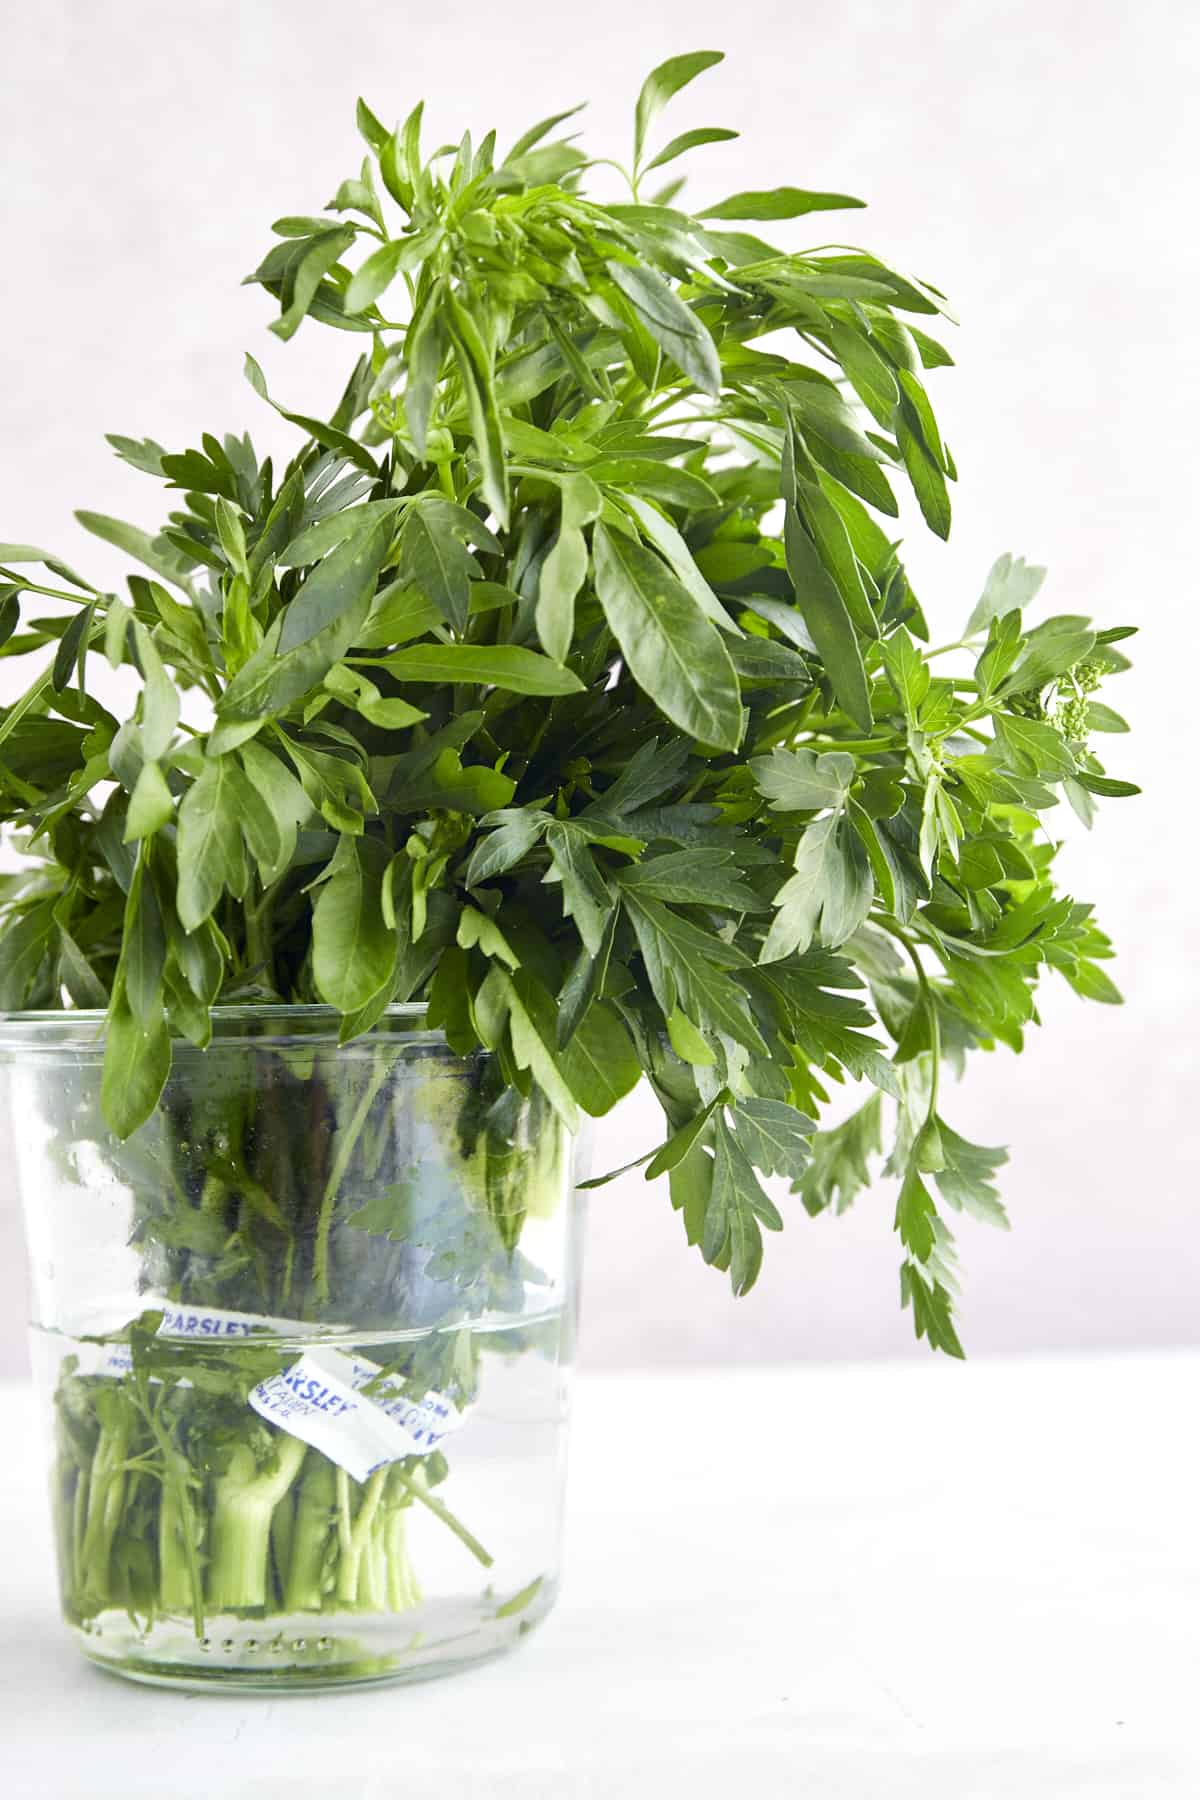 How to Store Parsley